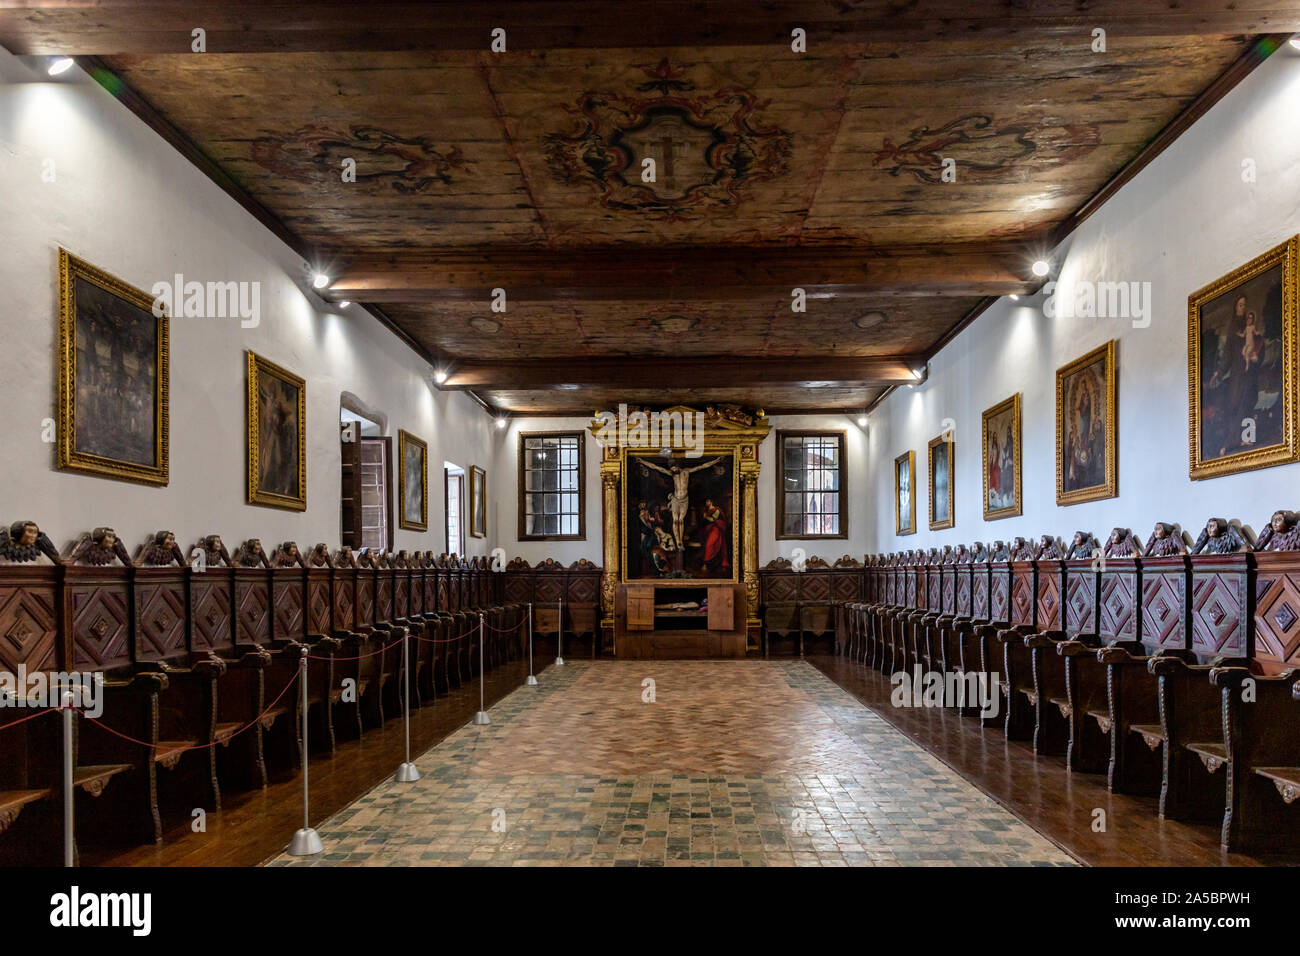 Large room with a painted ceiling and a row of wooden stalls. Convento de Santa Clara (Santa Clara Convent), Funchal, Madeira, Portugal Stock Photo